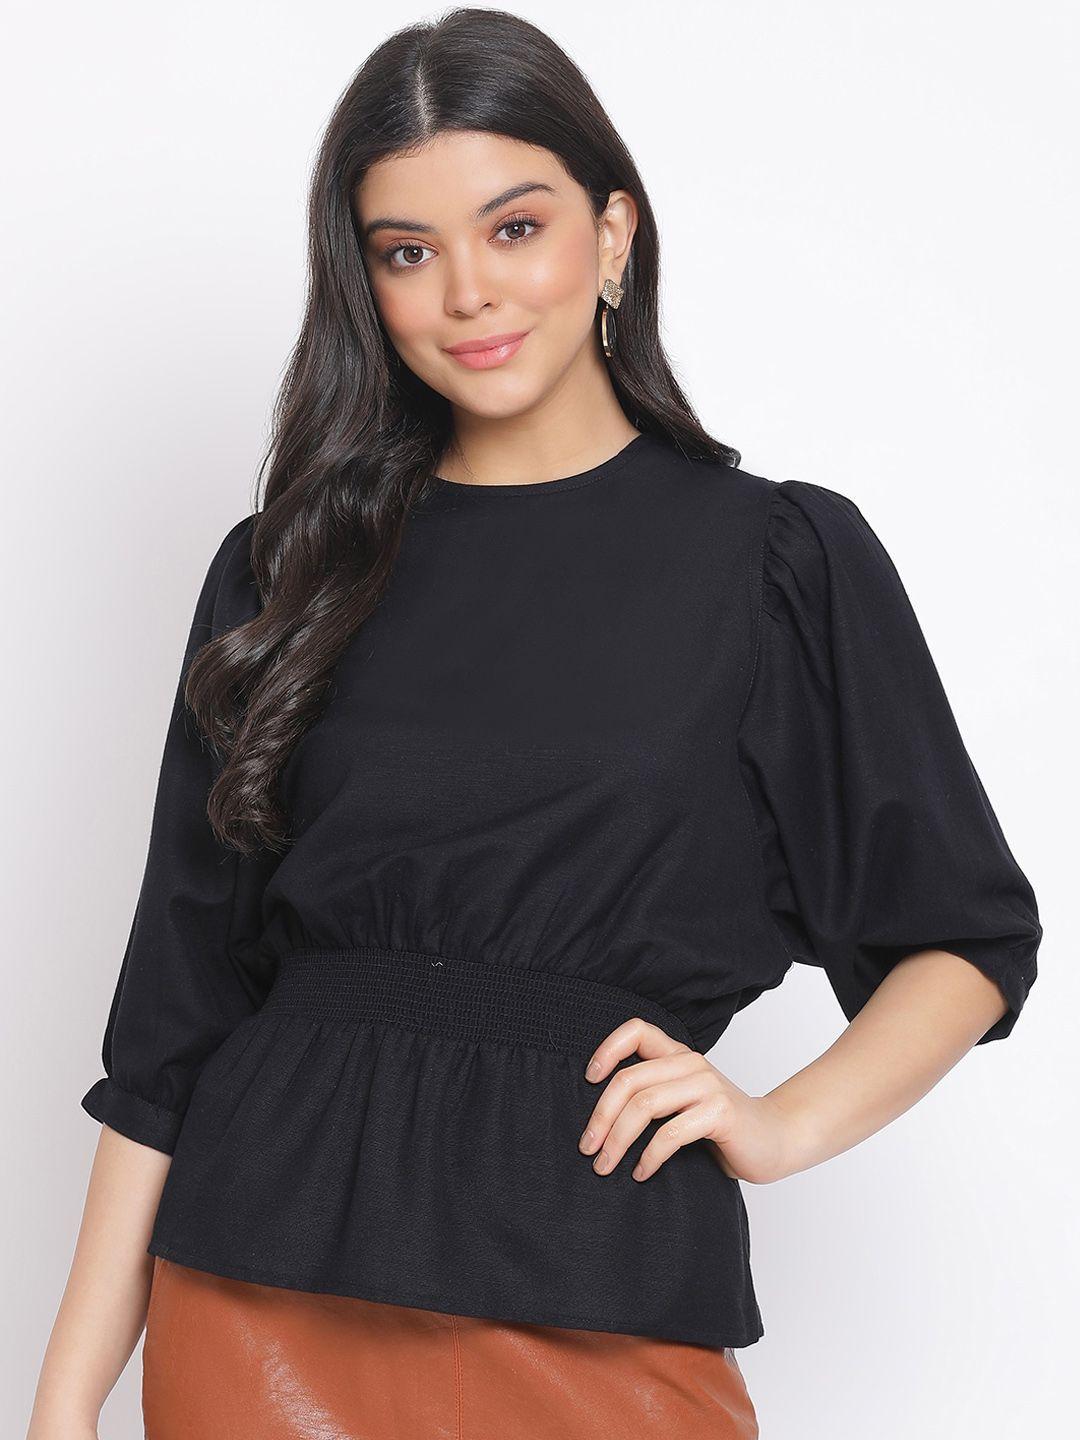 oxolloxo black puff sleeves cinched waist top